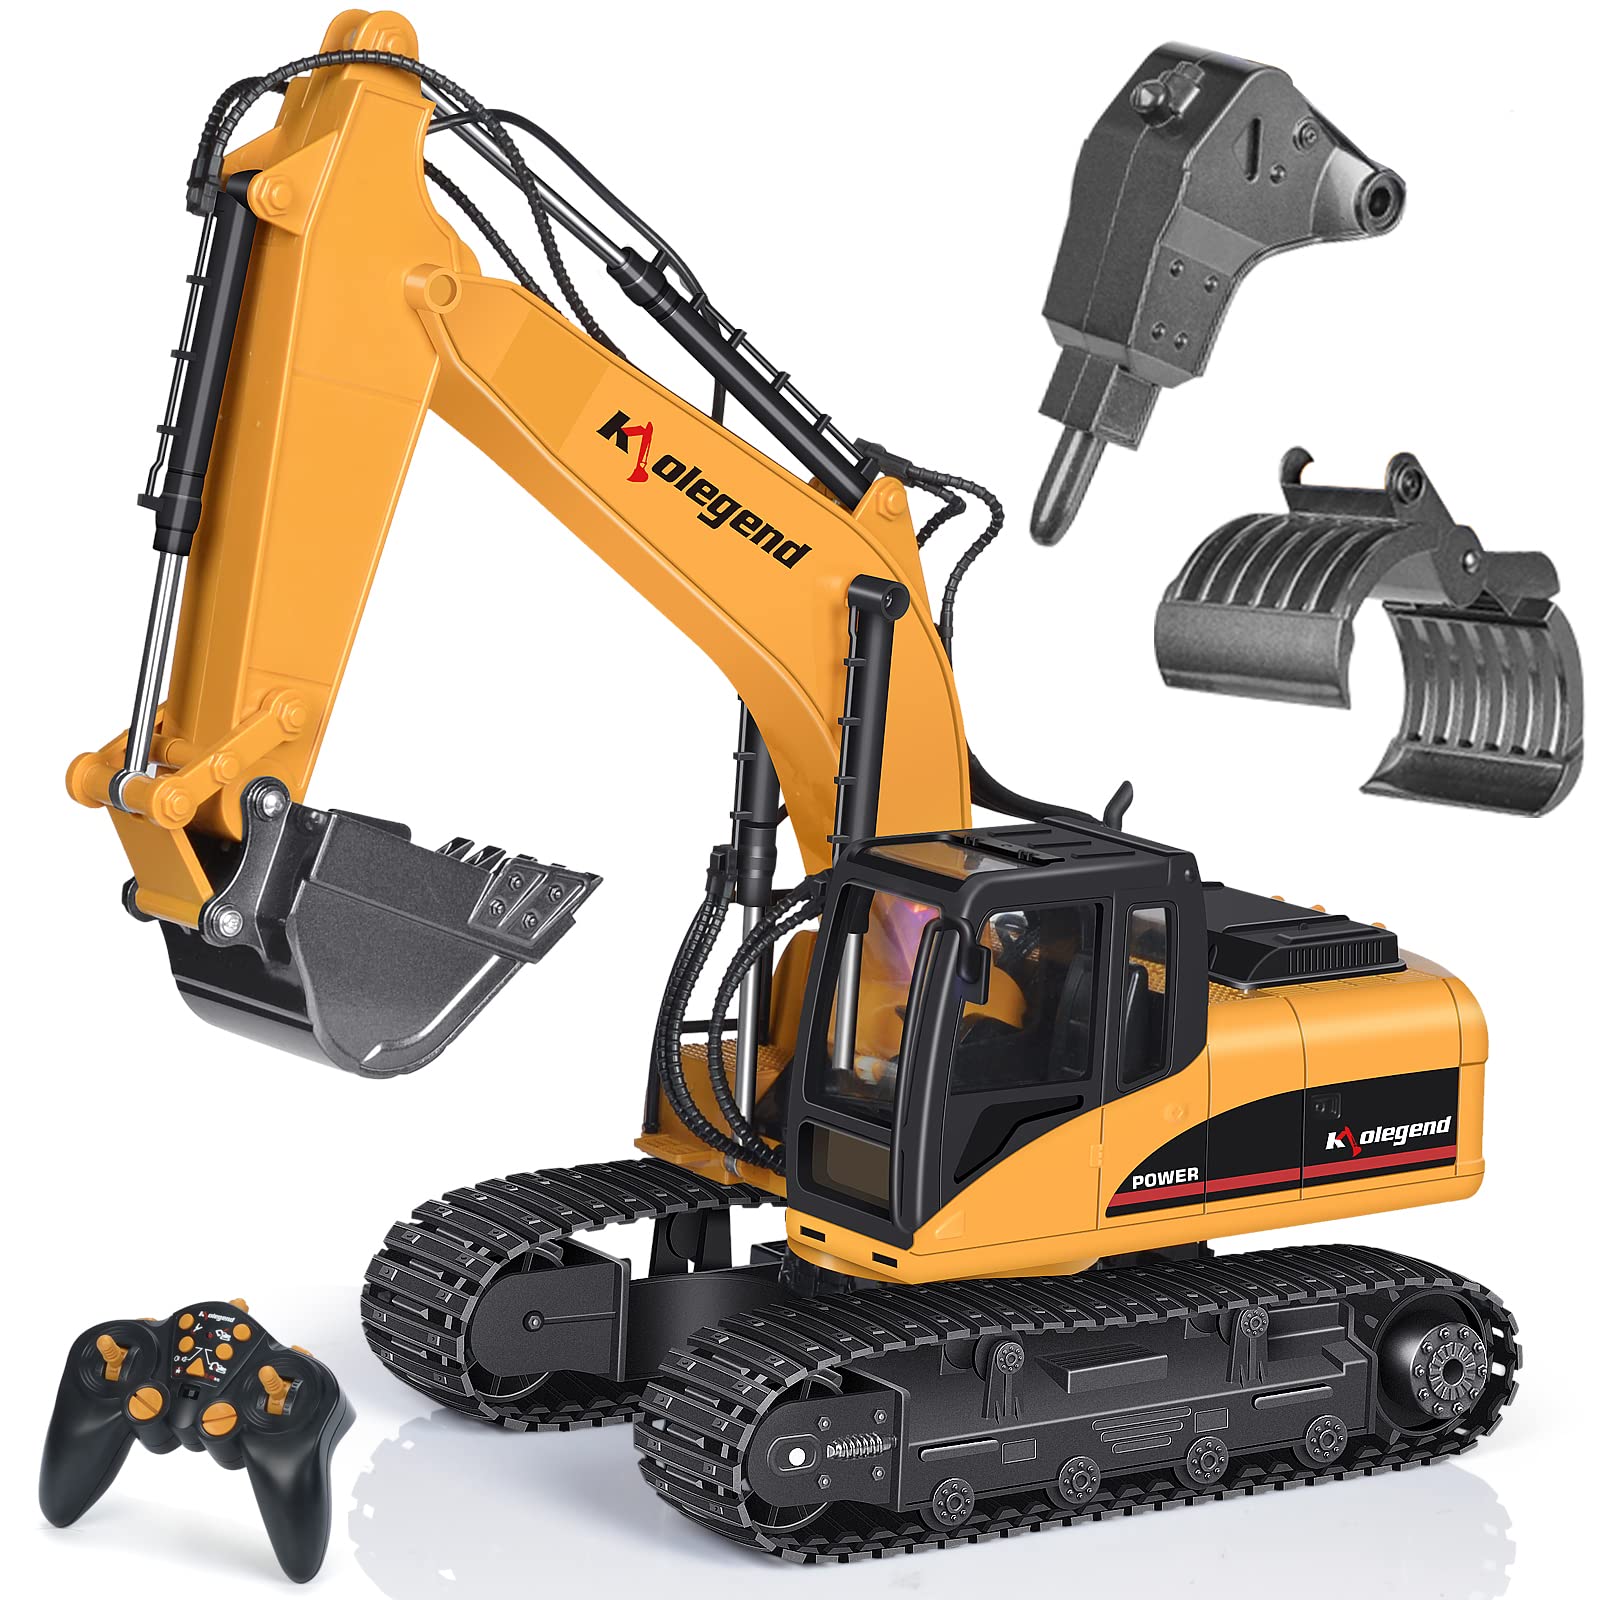 Mua kolegend 3 in 1 Remote Control Excavator with Grab Drill Metal Shovel,  15 Channel Full Functional Construction Tractor, 1/14 Excavator Toy Truck RC  Vehicles trên Amazon Mỹ chính hãng 2023 | Giaonhan247